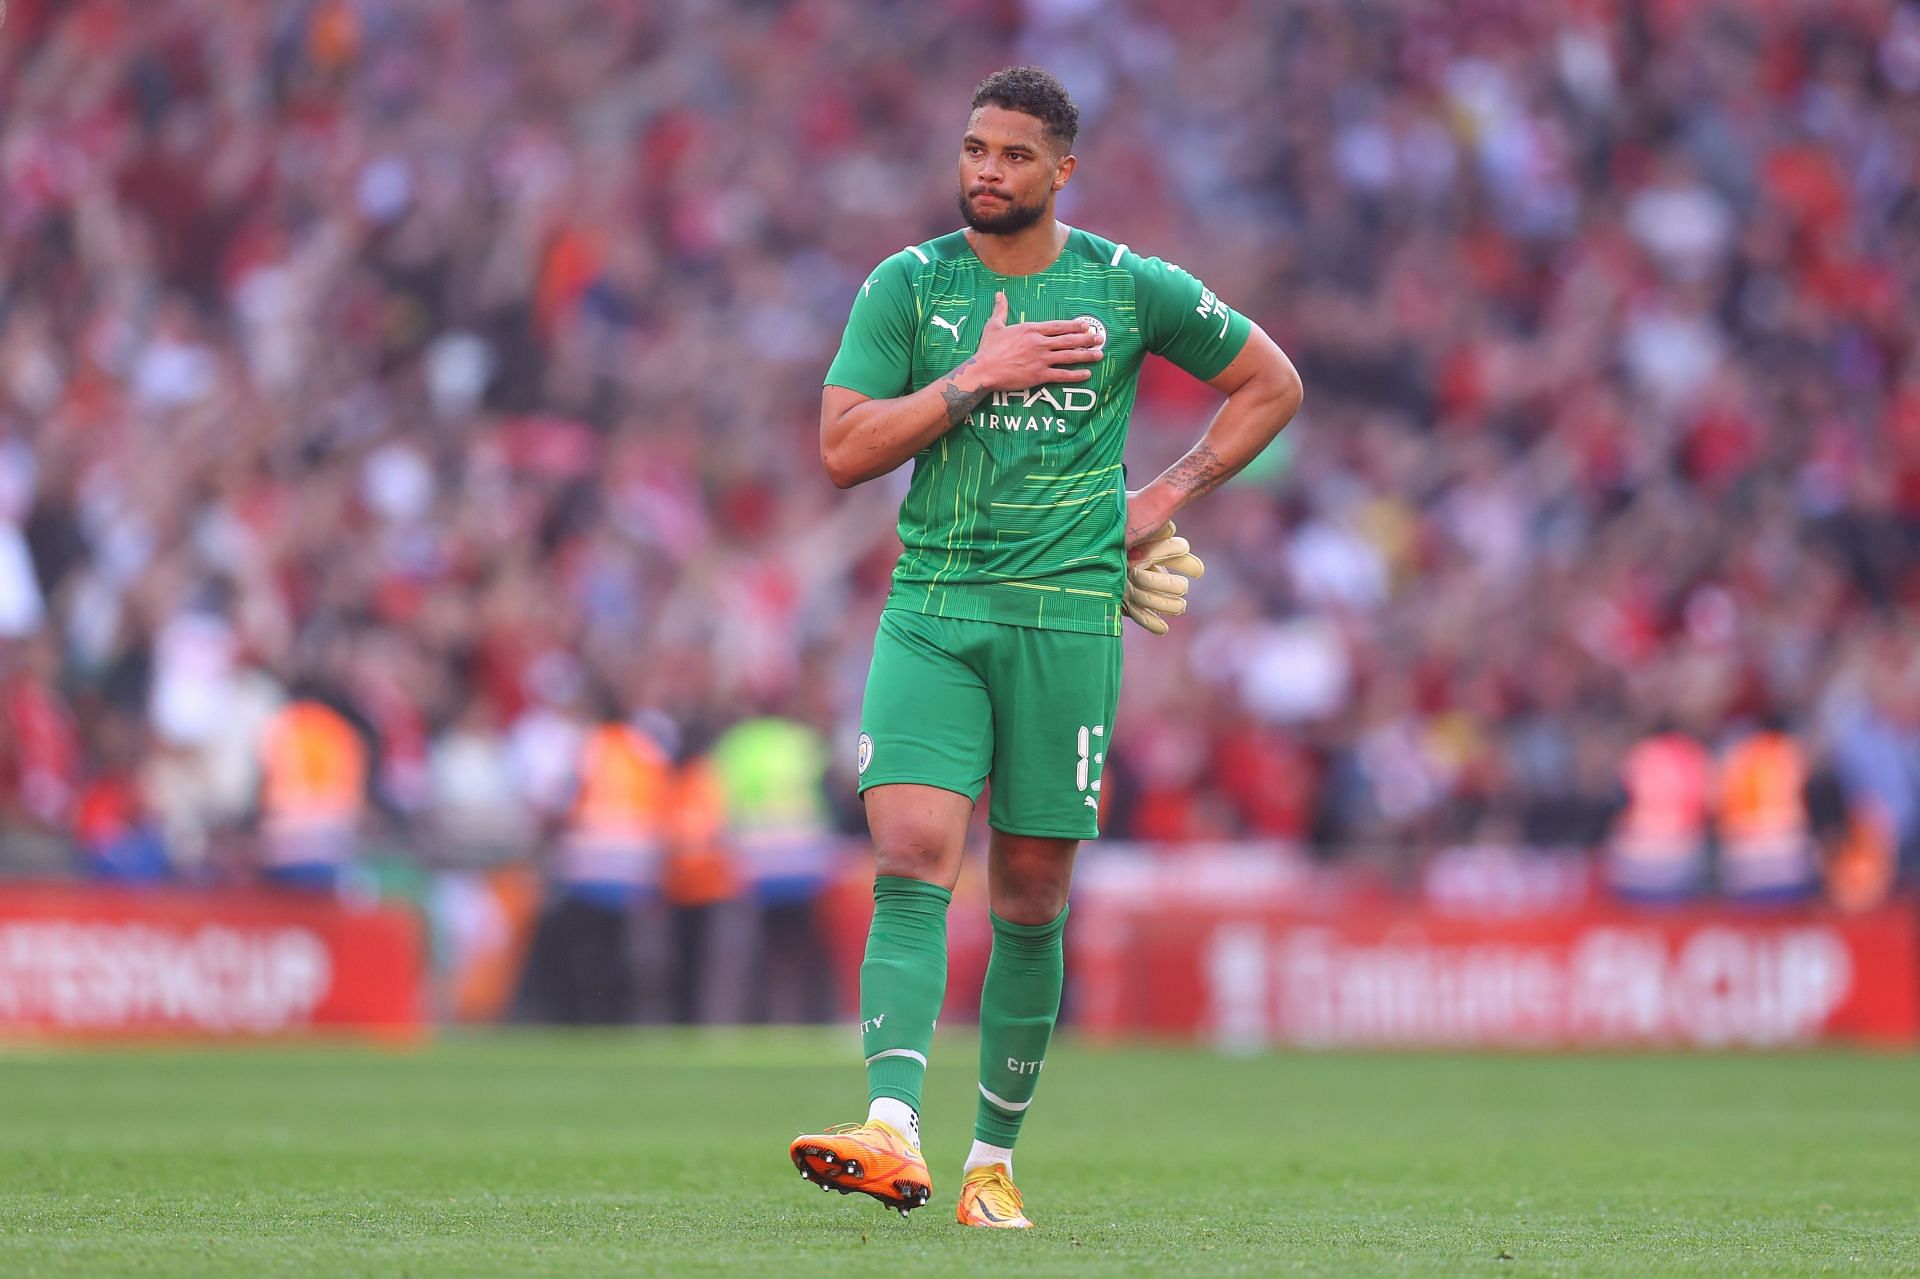 Zack Steffen was disastrous during the Manchester City vs Liverpool clash